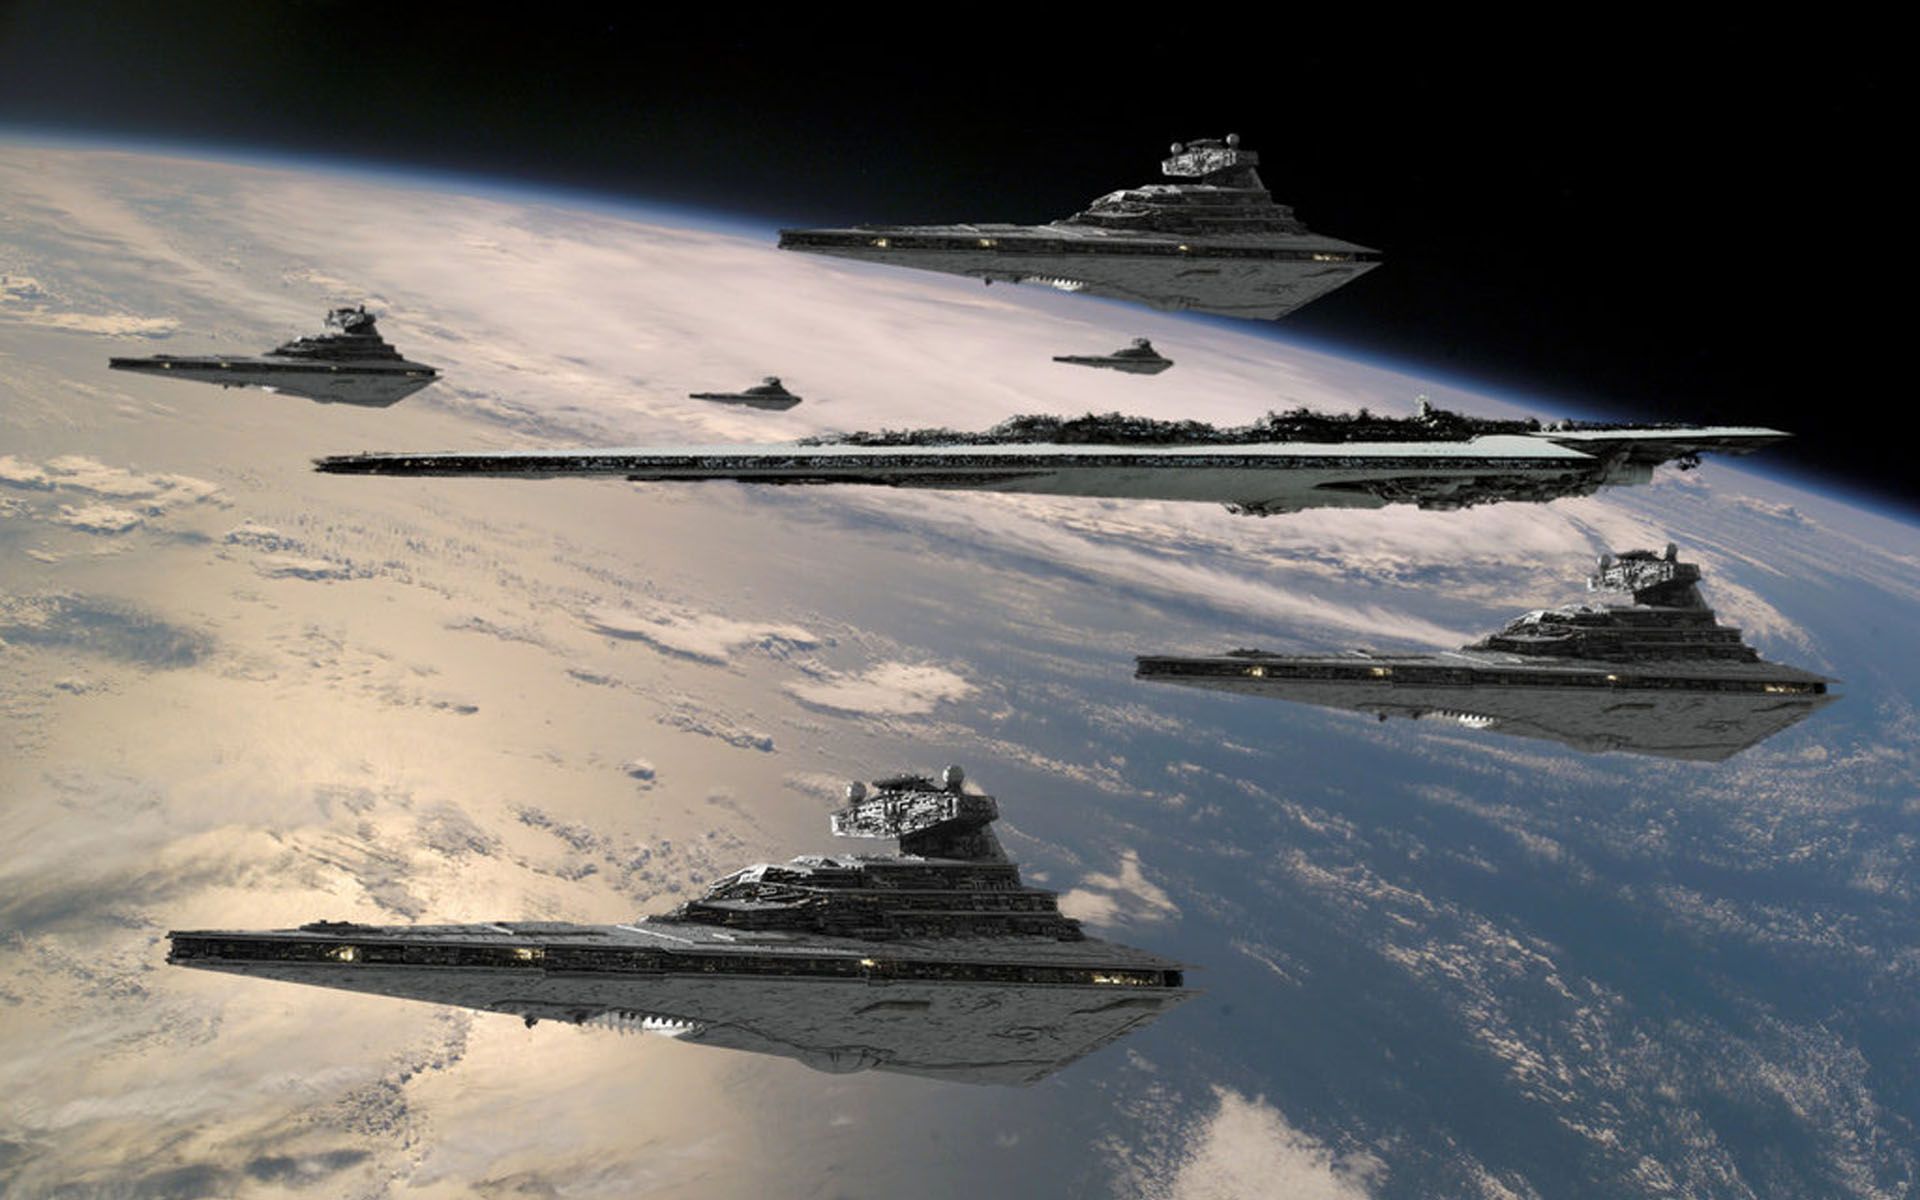 Imperial Star Destroyer Fleet with The Executor Super Star Destroyer over planet. Star wars image, Star destroyer wallpaper, Star wars ships